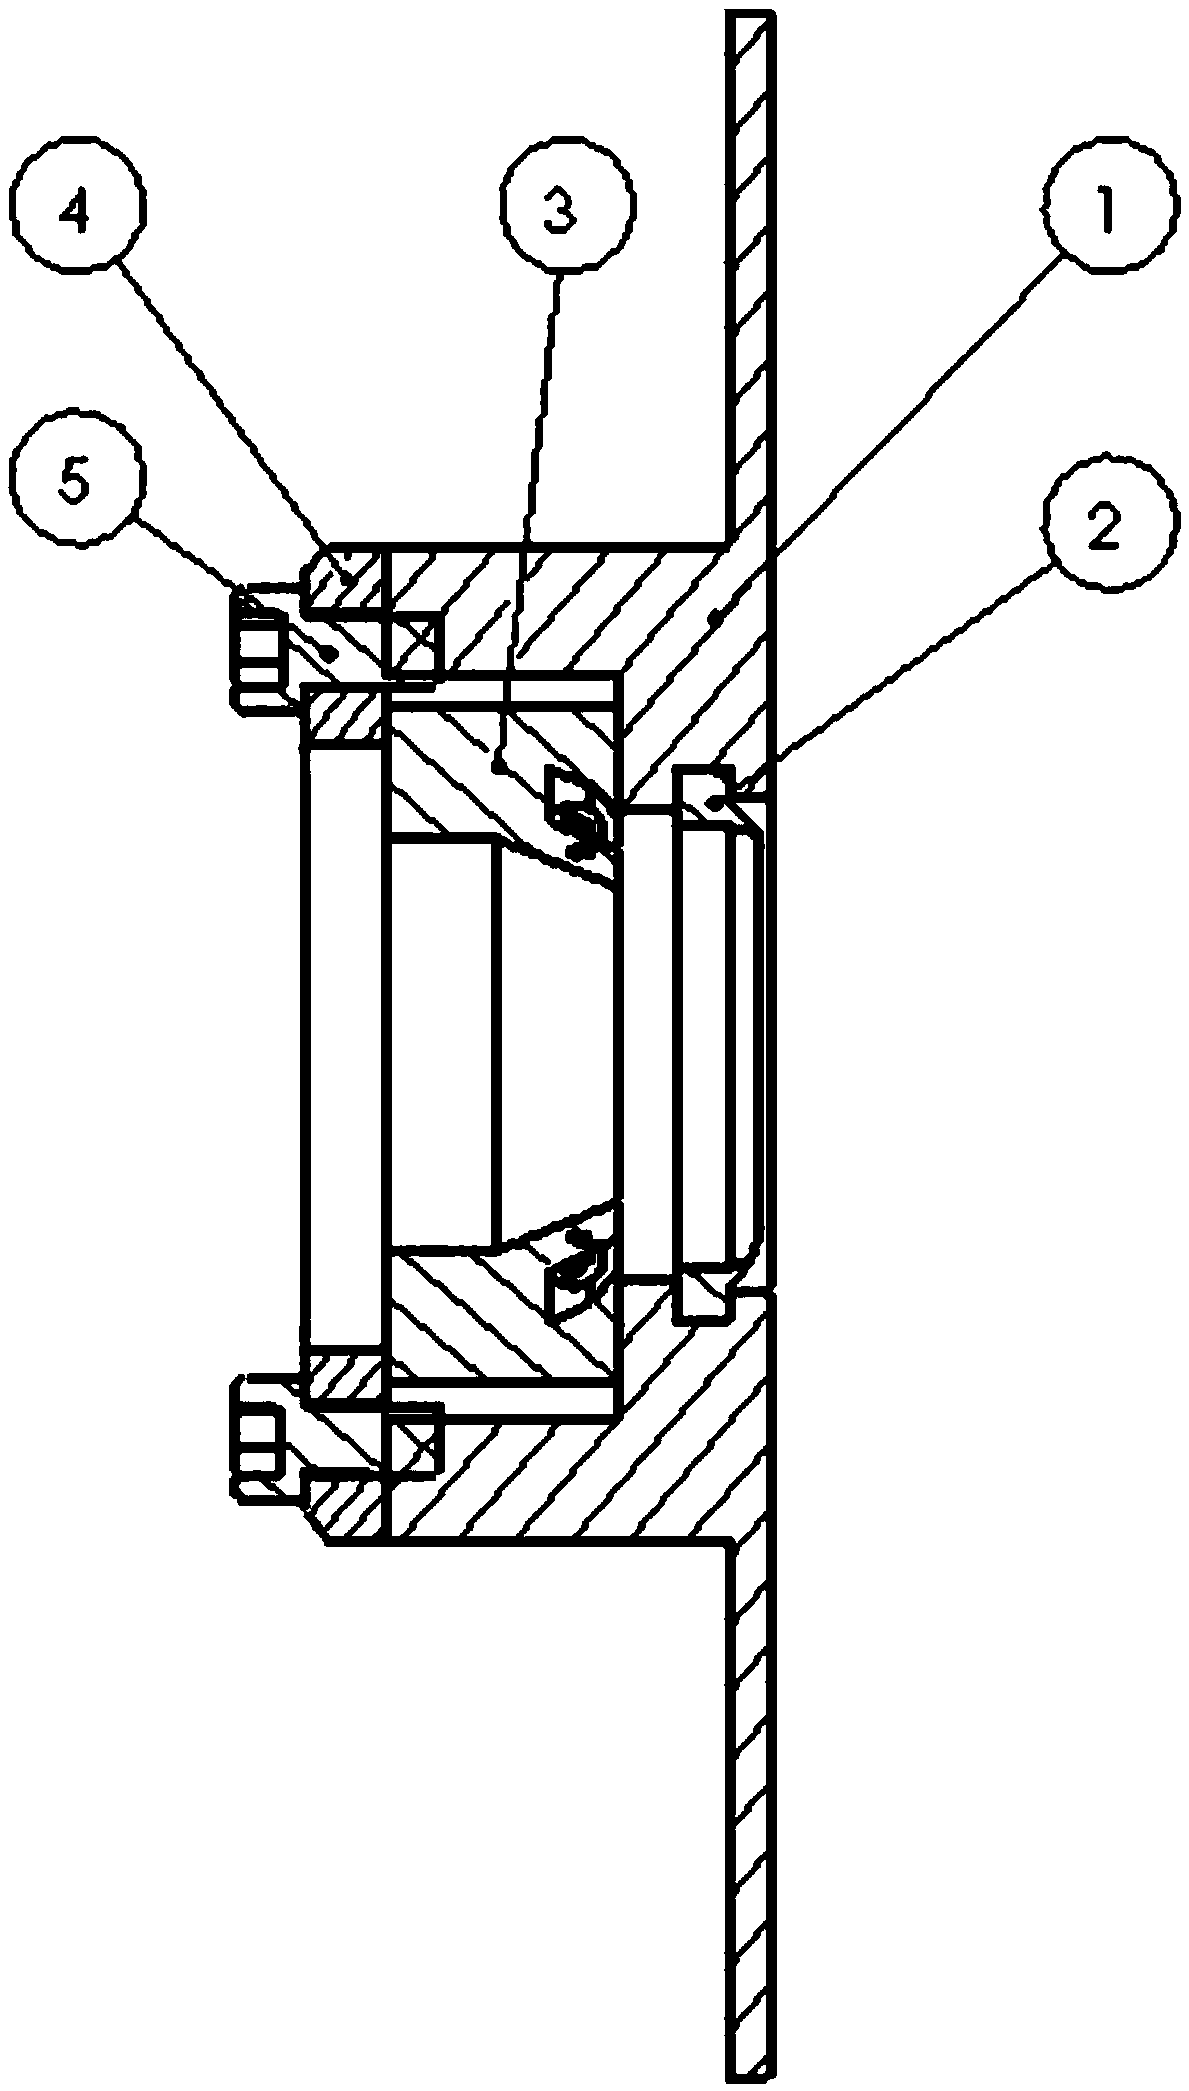 Novel oil scraping device for natural gas compressor